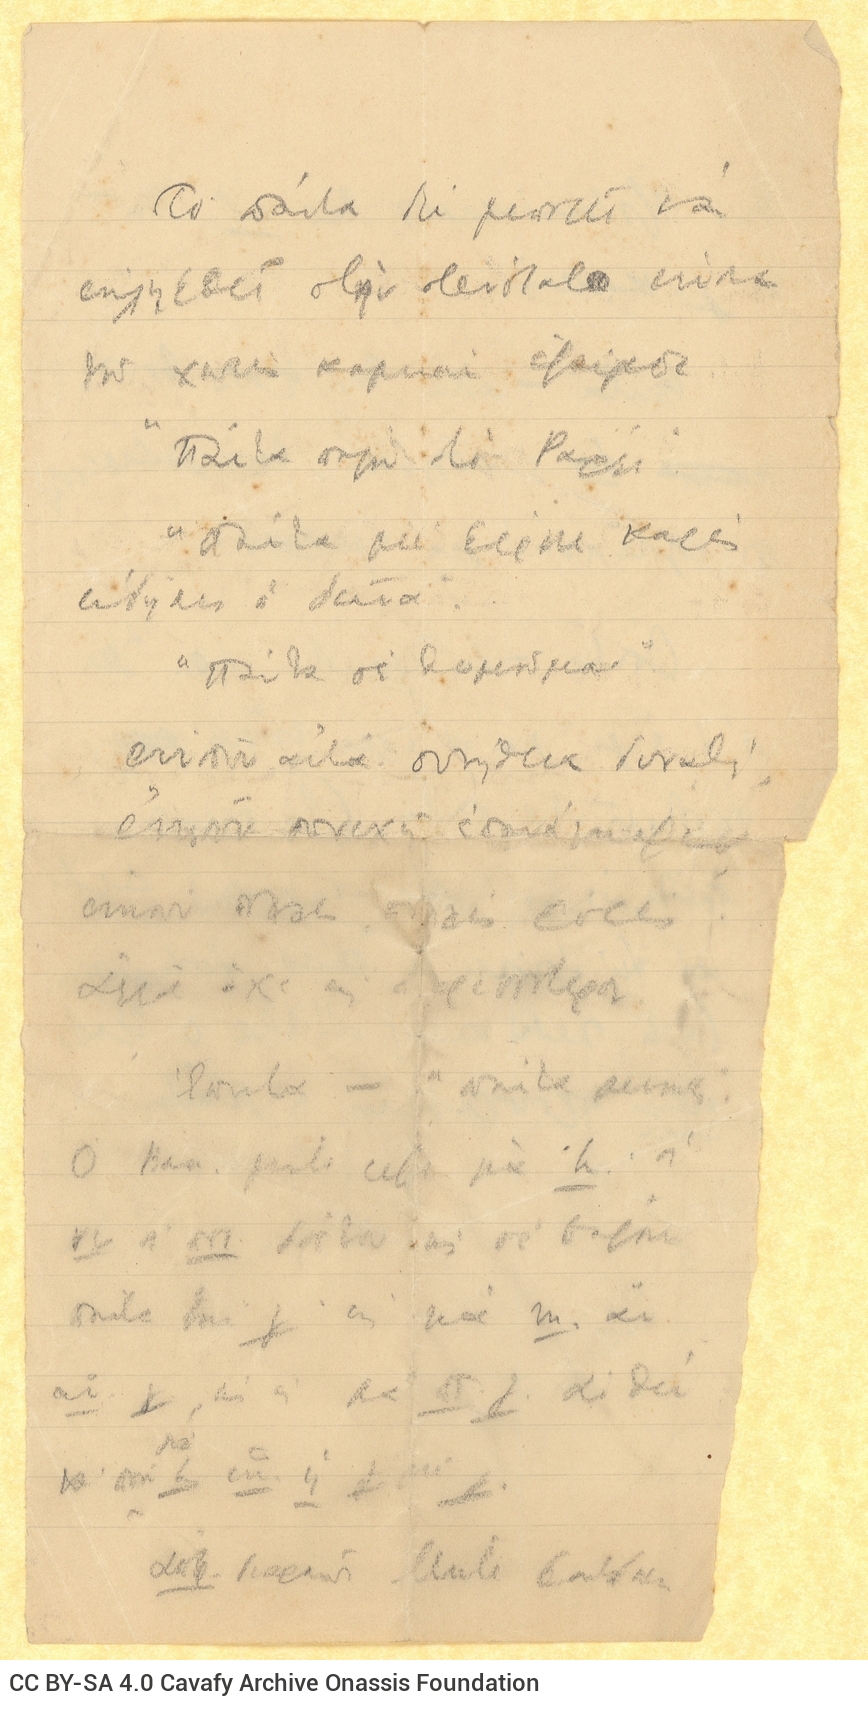 Handwritten notes by Cavafy on both sides of a ruled sheet. Abbreviations. Comments on the use of the word "always".